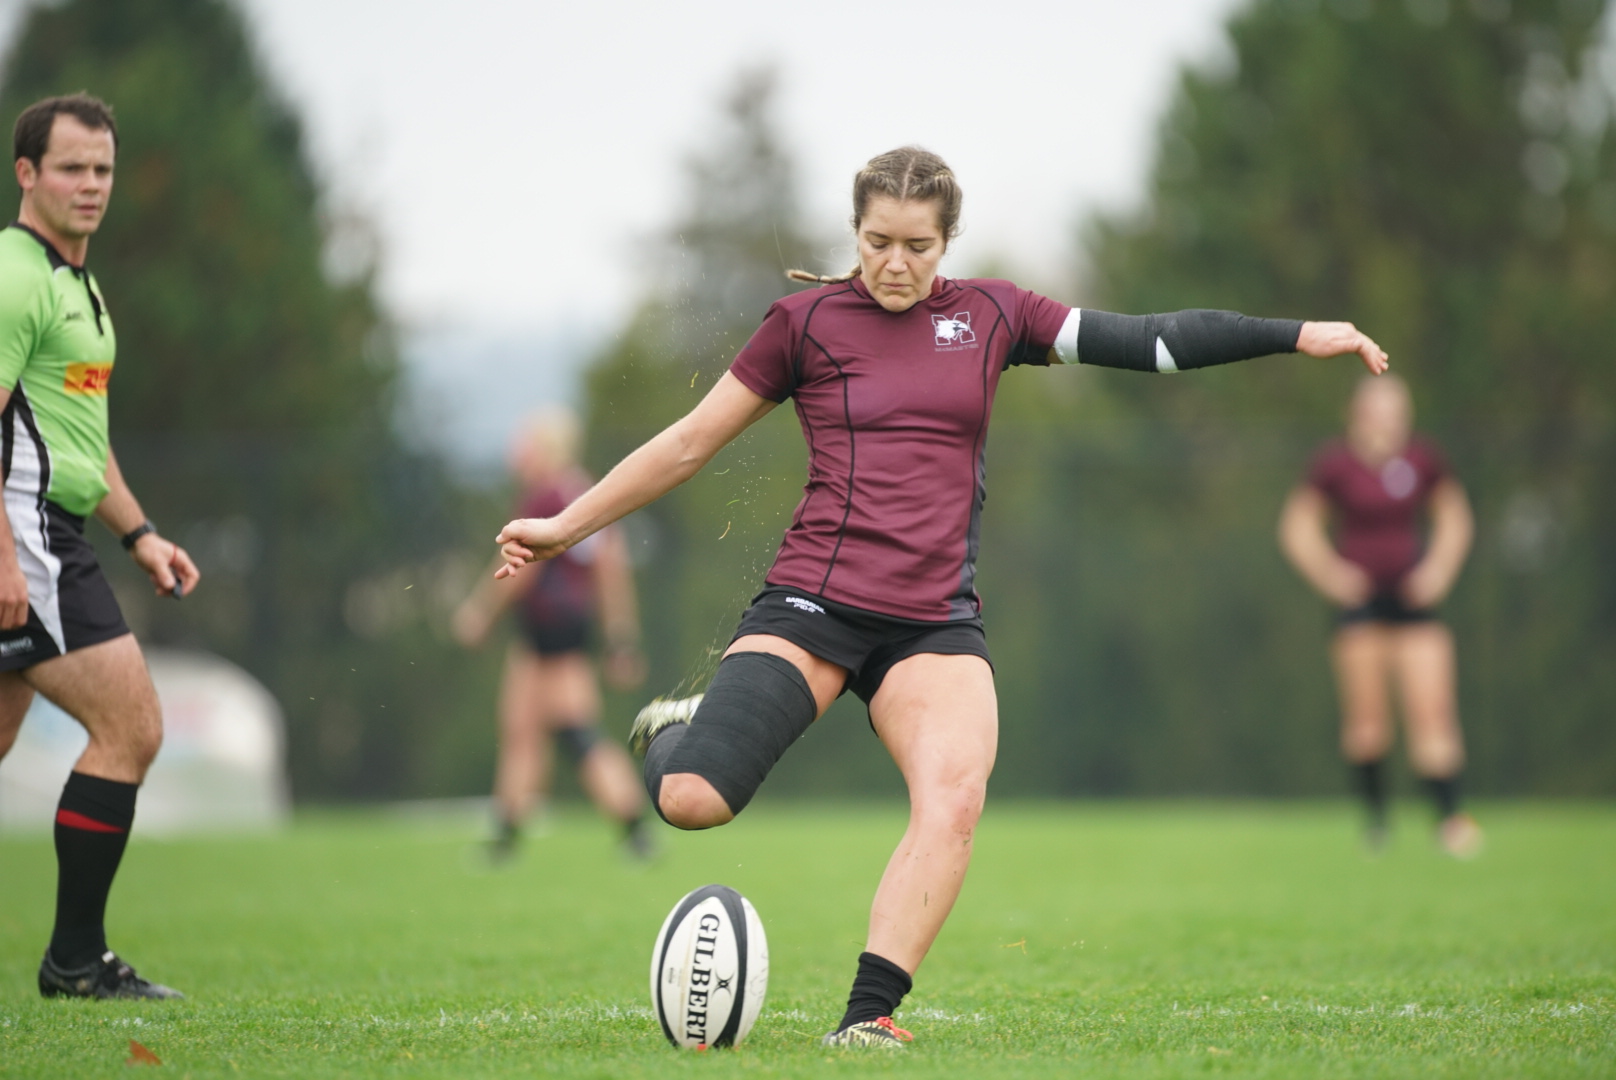 2016 Women’s Rugby Championship: Marauders down Axewomen to book spot in consolation finals